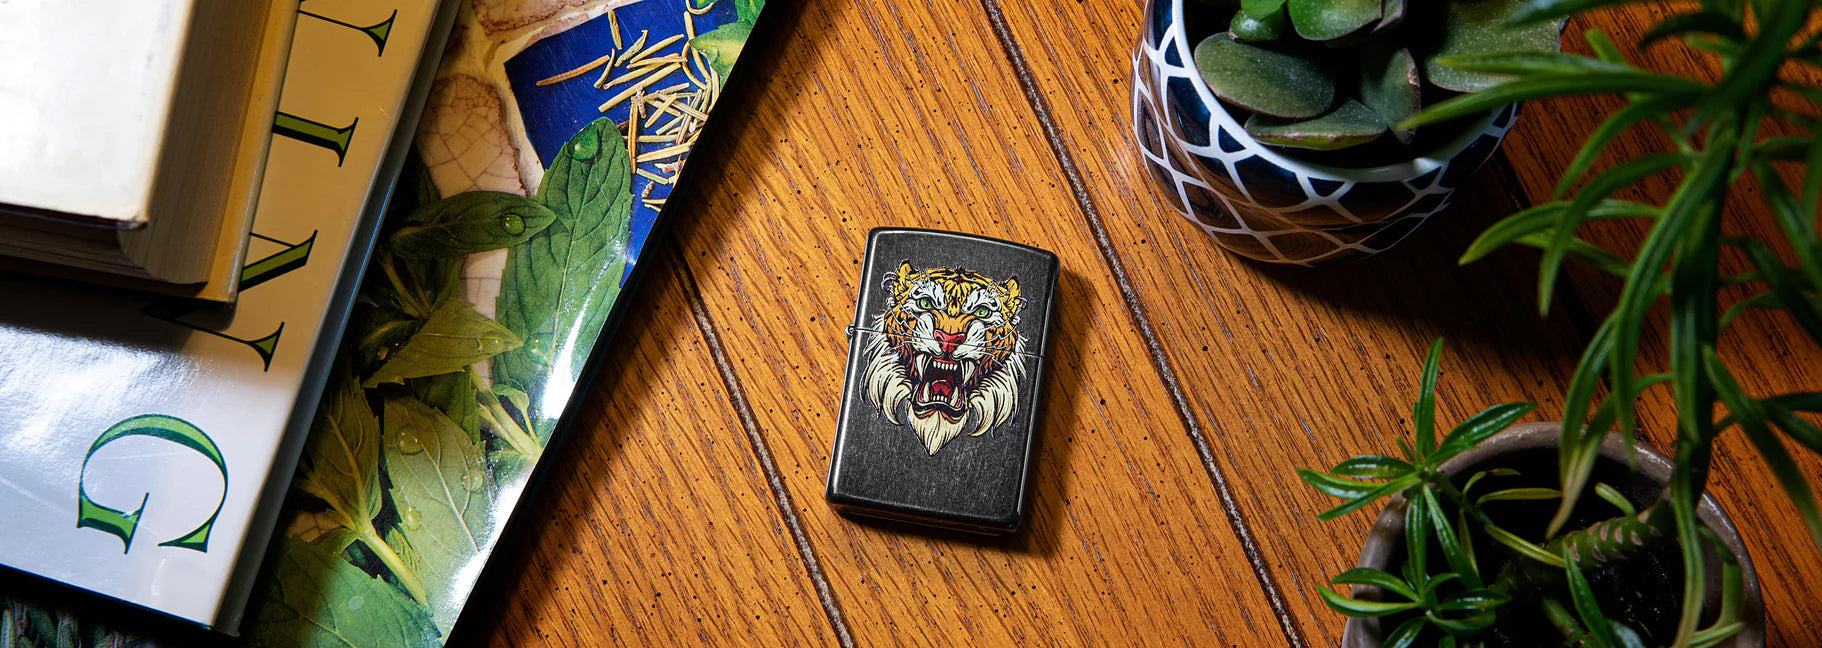 Plants and framed pictures of nature on a wood floor with a Zippo lighter in the middle with a lion design.